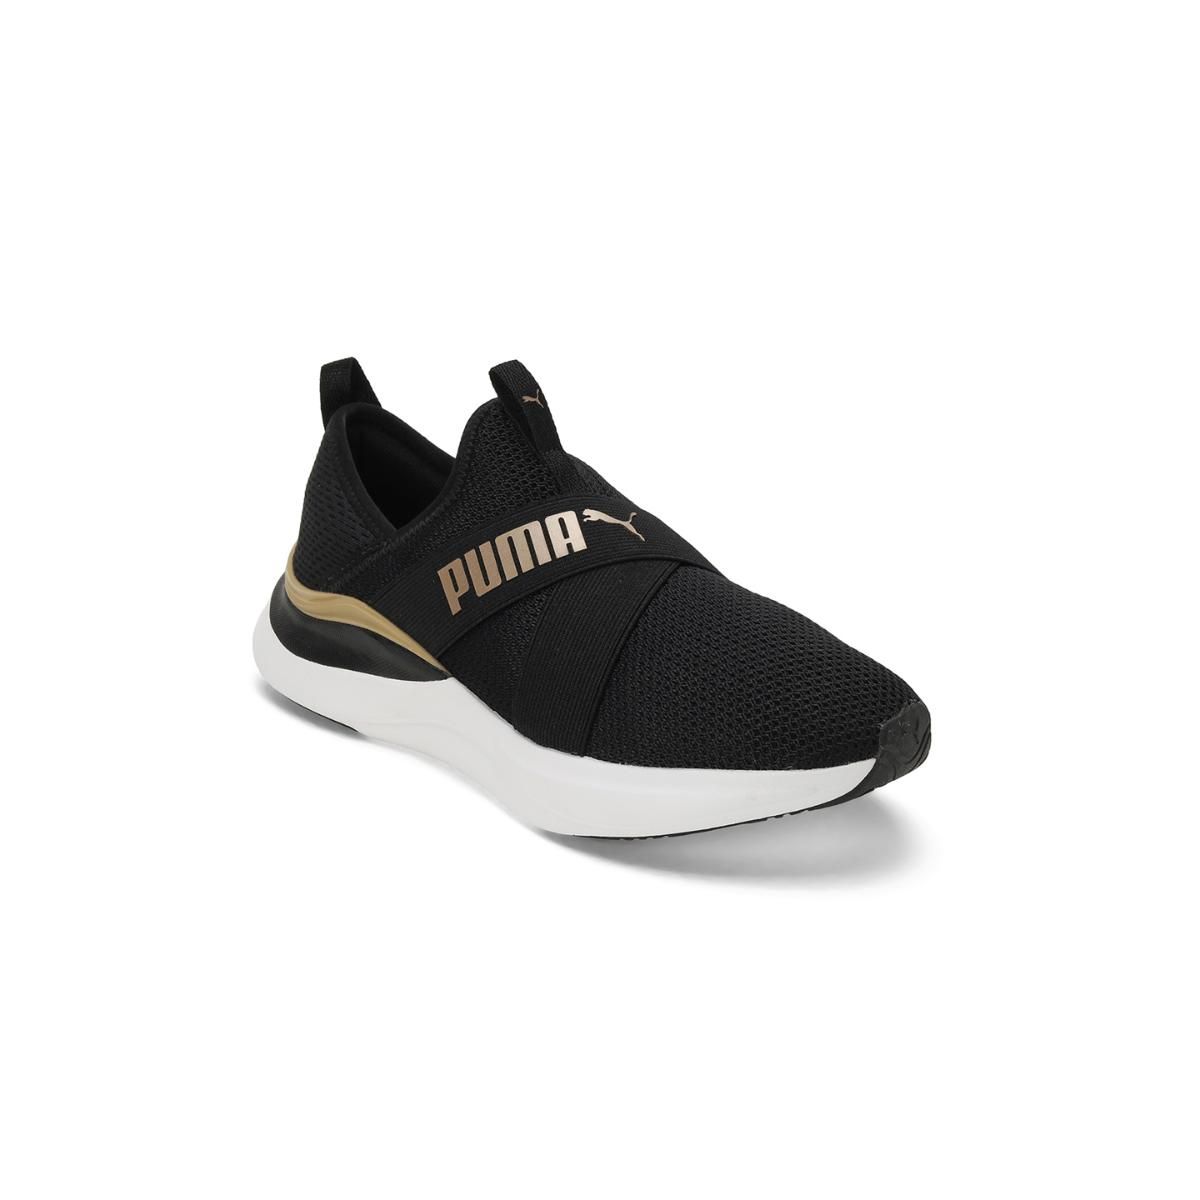 Bacca Bucci DOWNTOWN DYNAMO Low-Top Sneakers: A Symphony of Style with